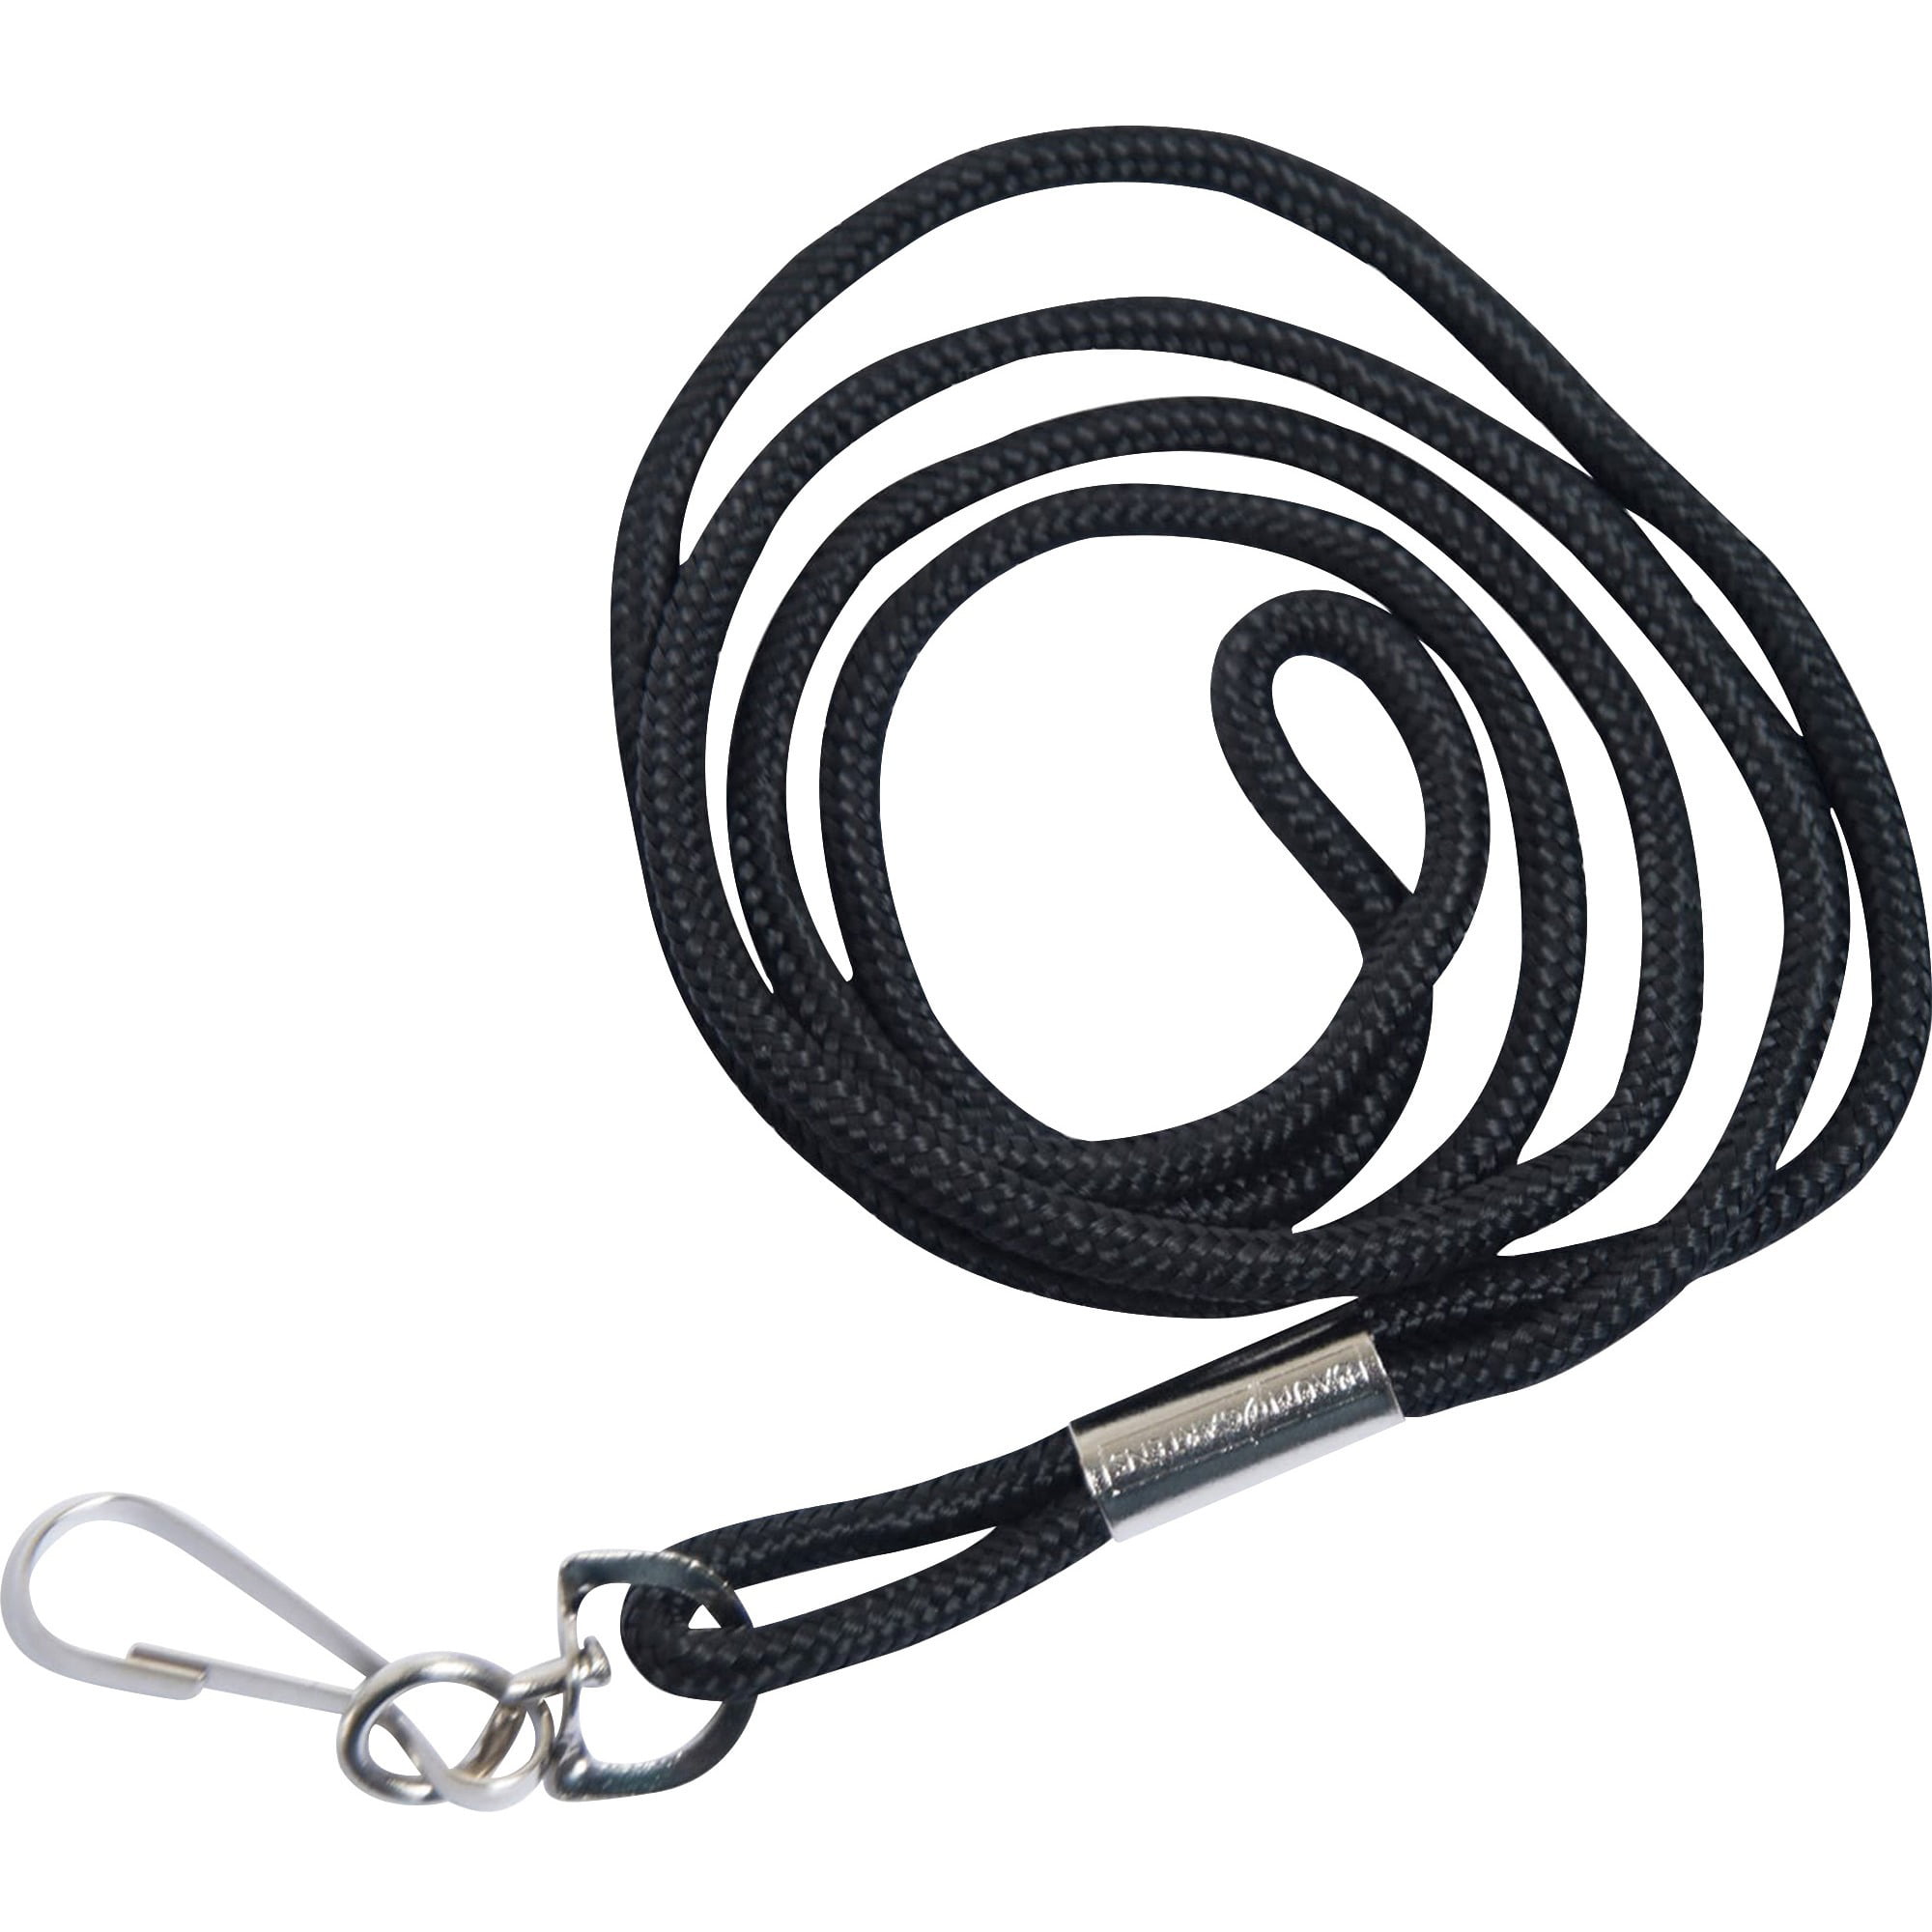 Mato & Hash Nylon Lanyard with J-Clasp for ID Cards Refs Passes 